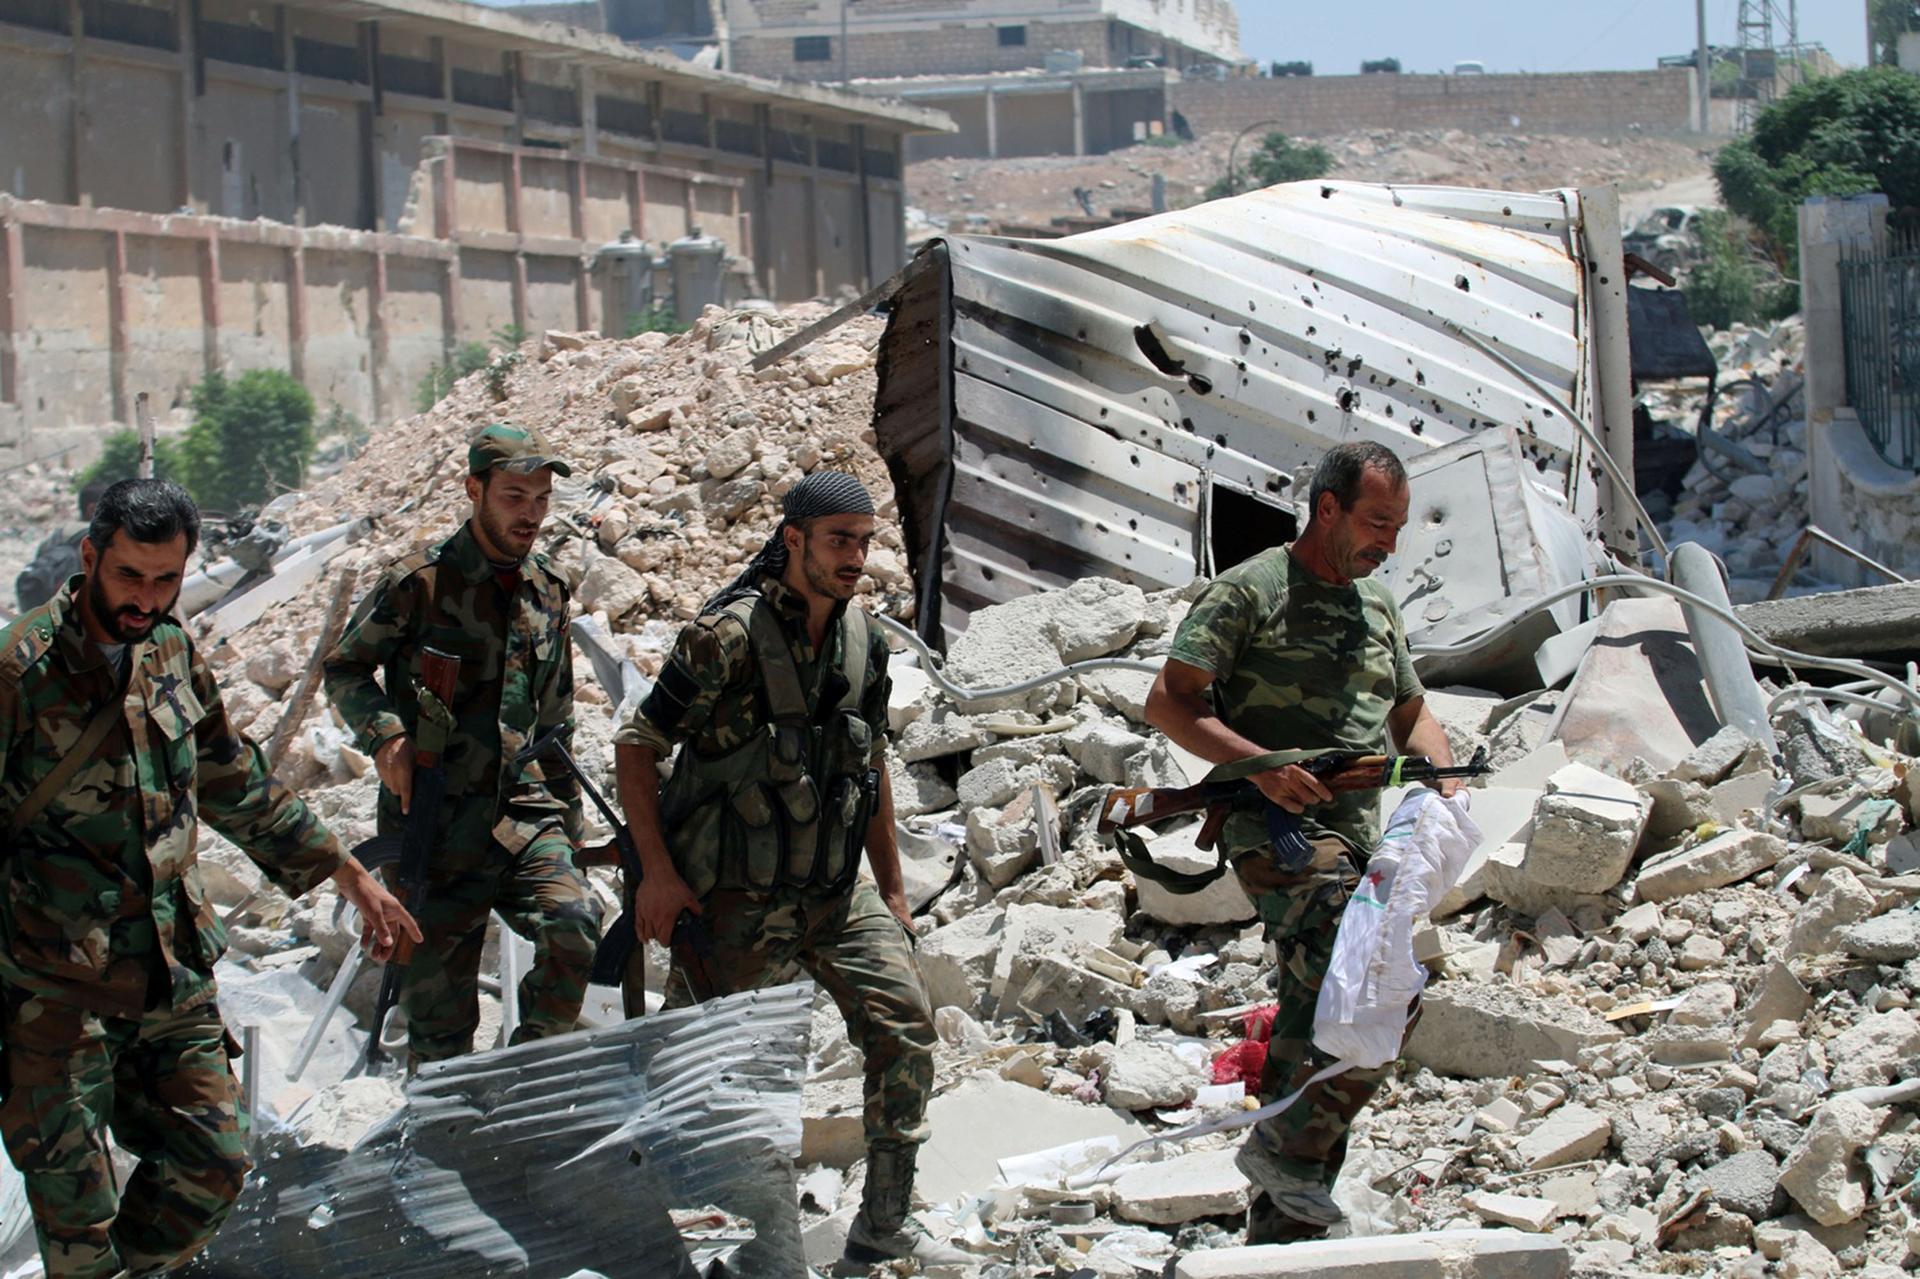 Forces loyal to Syria's President Bashar al-Assad walk through rubble after they advanced on the southern side of the Castello road in Aleppo, Syria, in this handout picture provided by SANA on July 28, 2016.